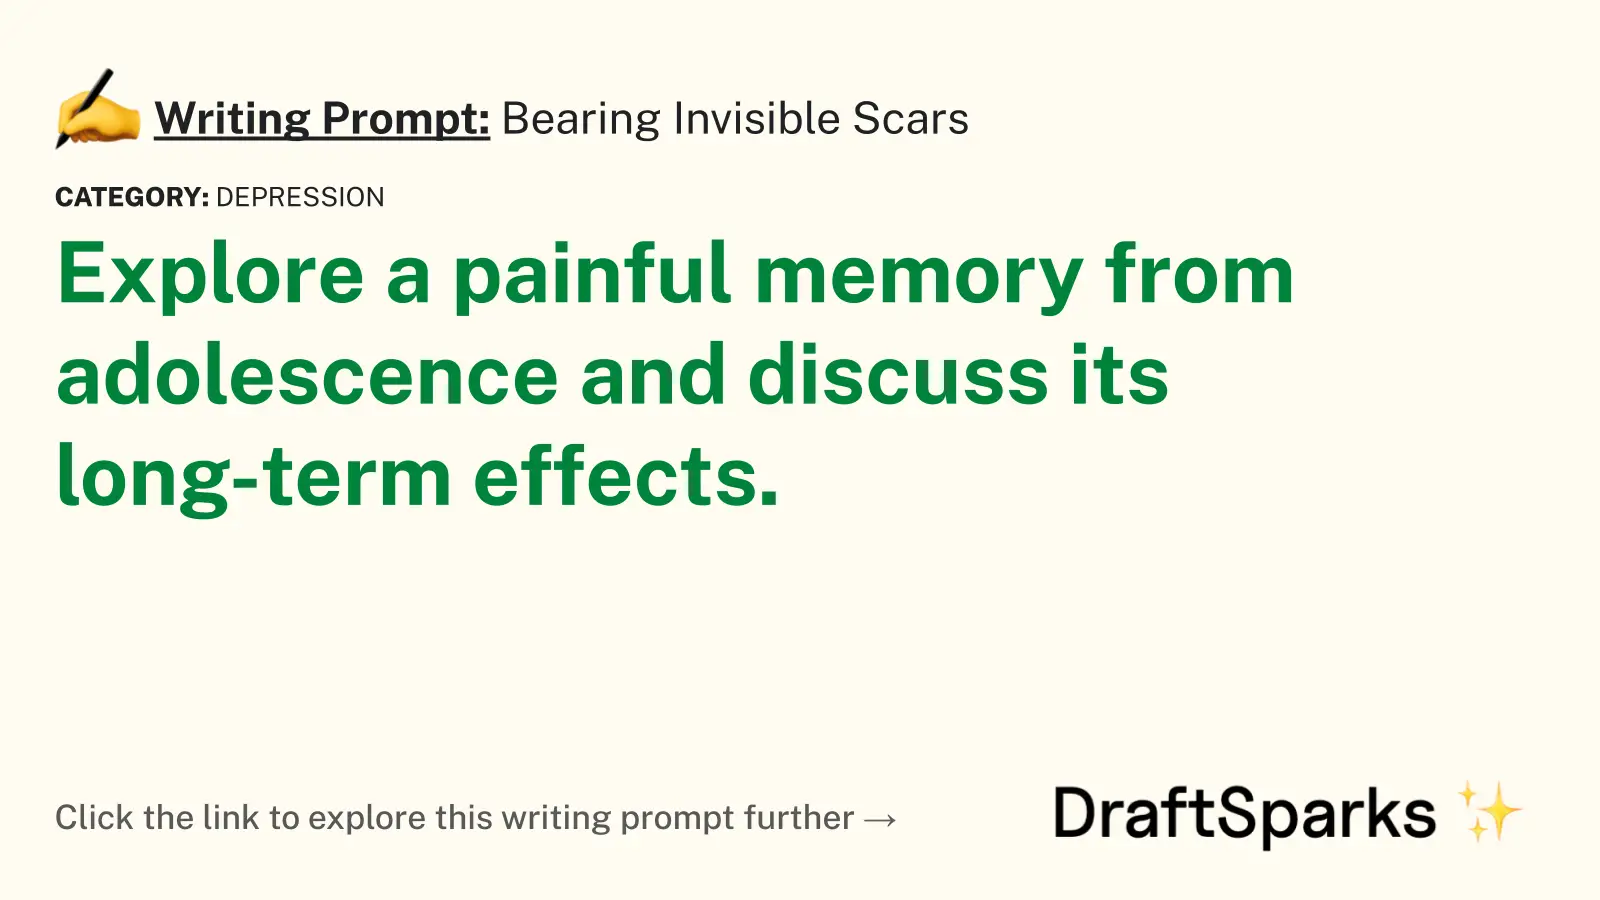 Bearing Invisible Scars